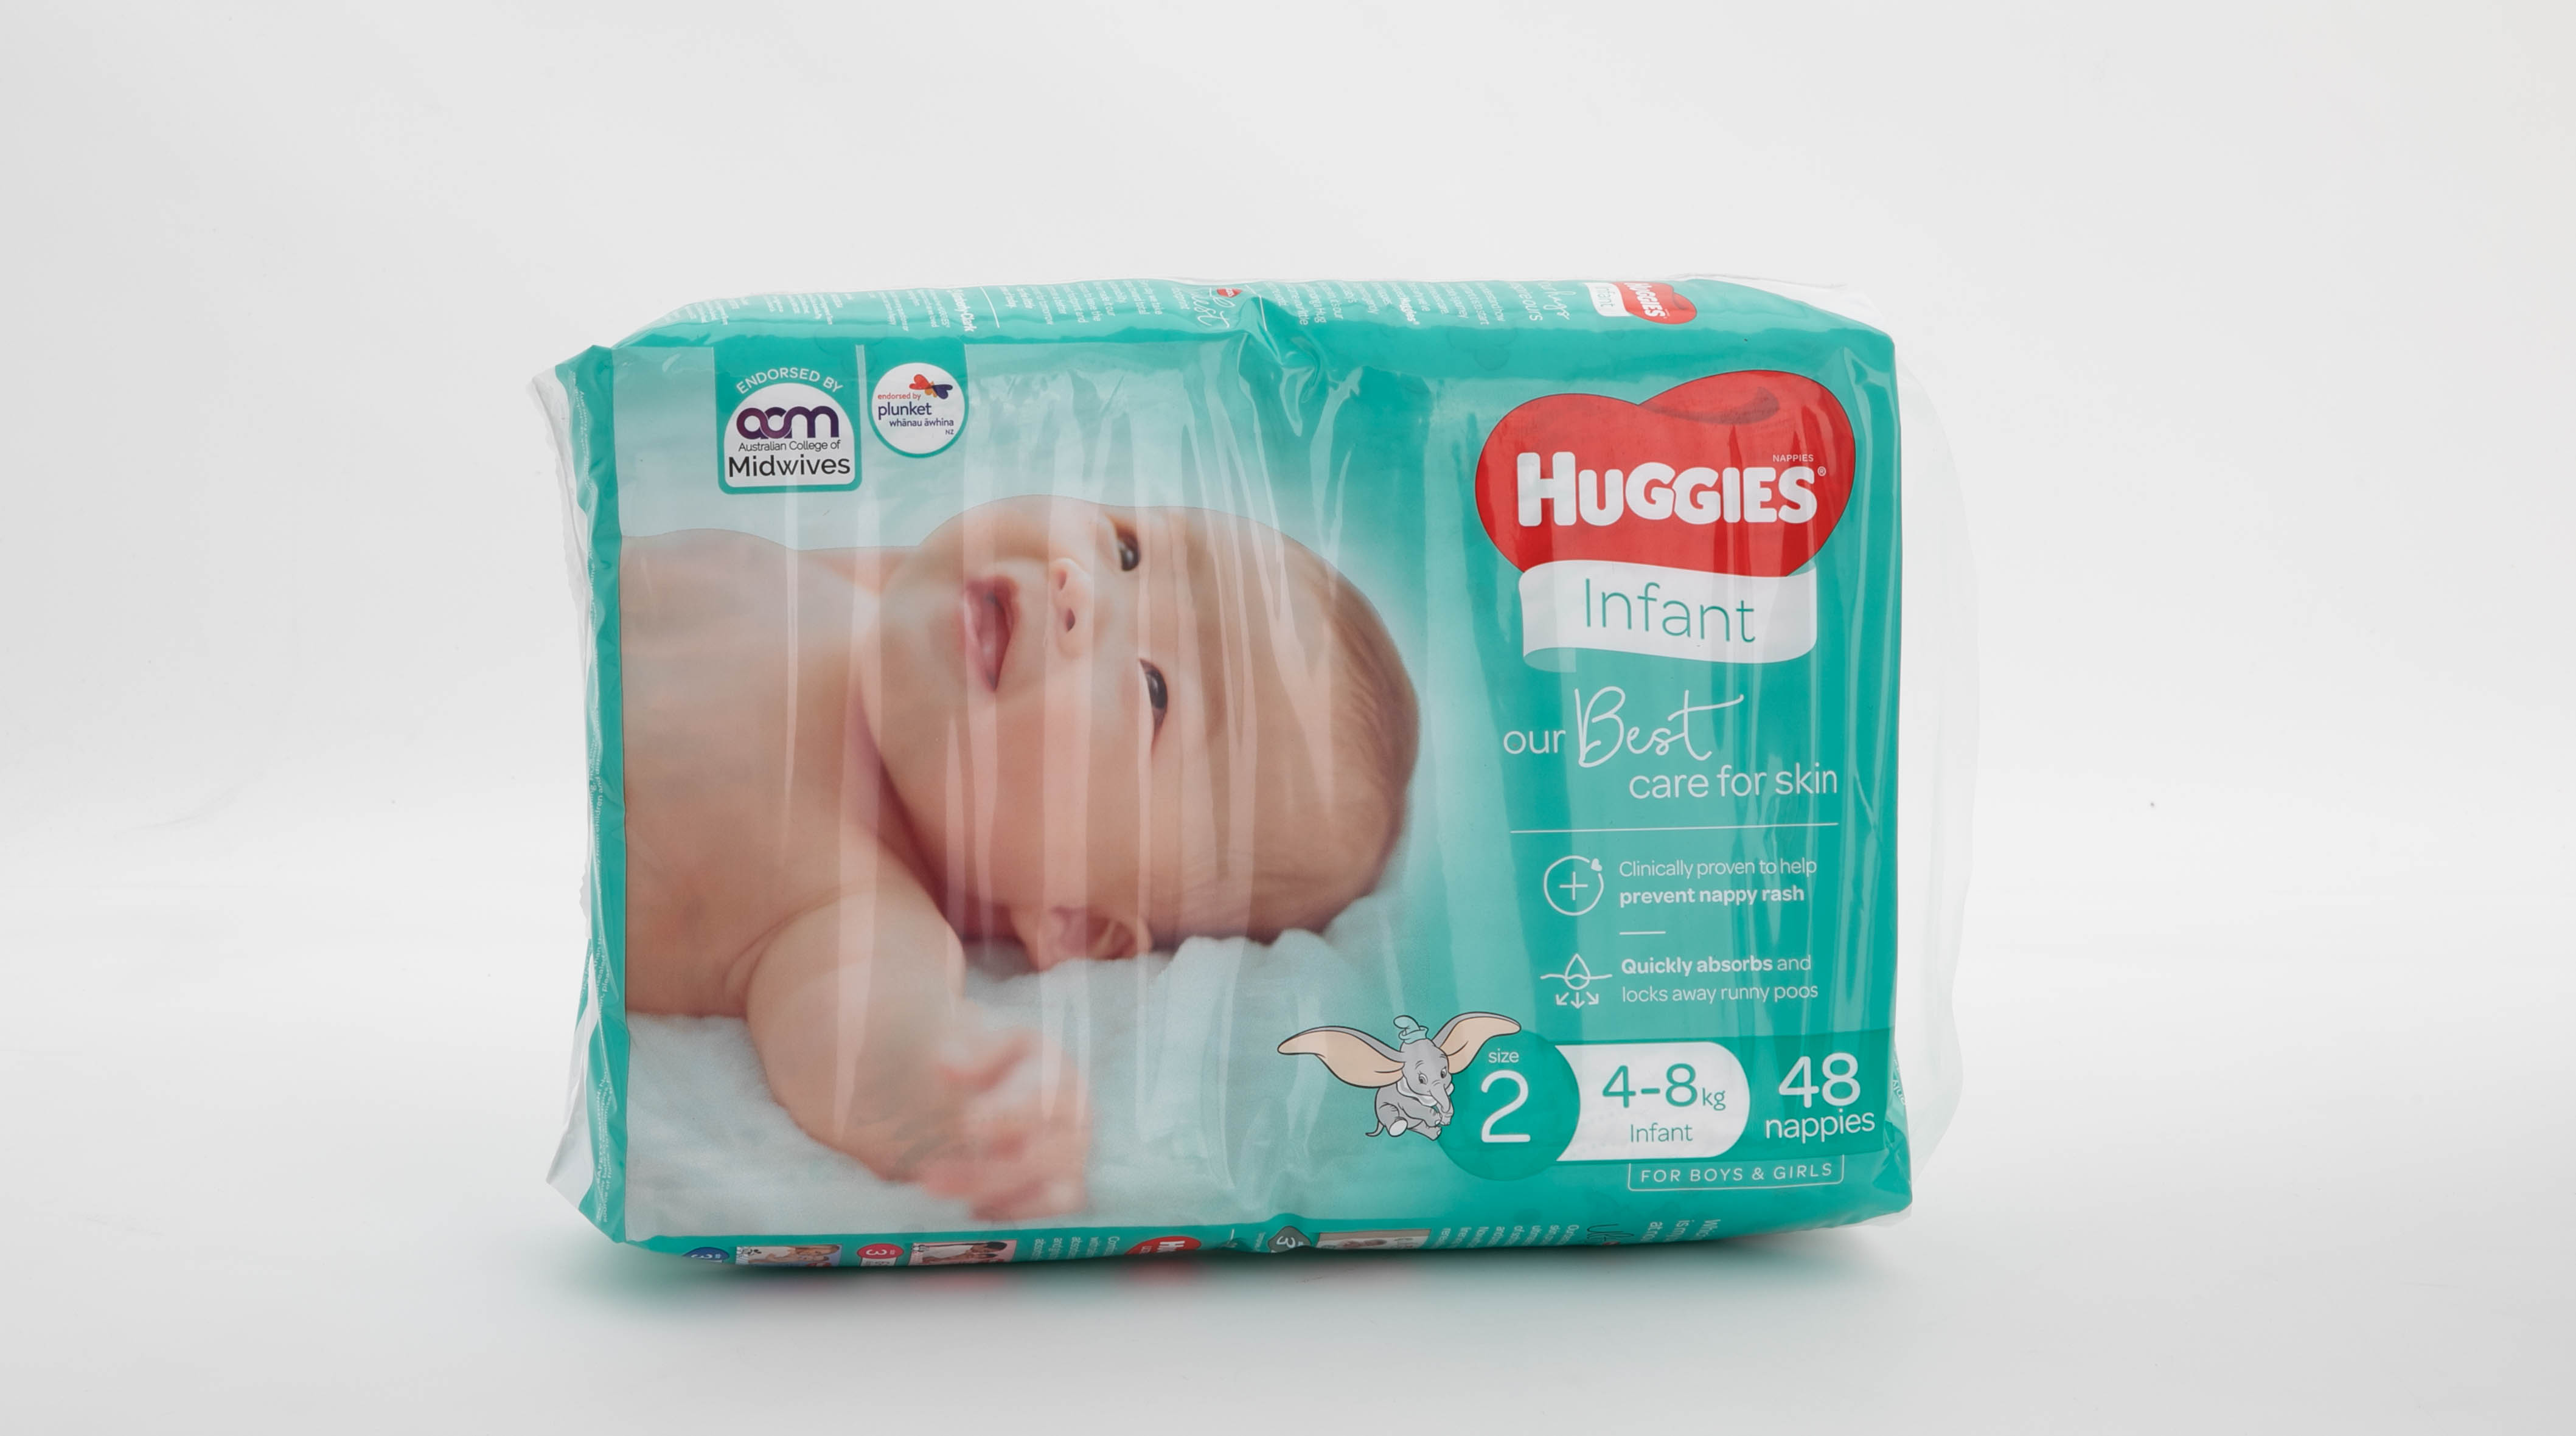 Huggies Infant Size 2 Review Disposable nappy CHOICE